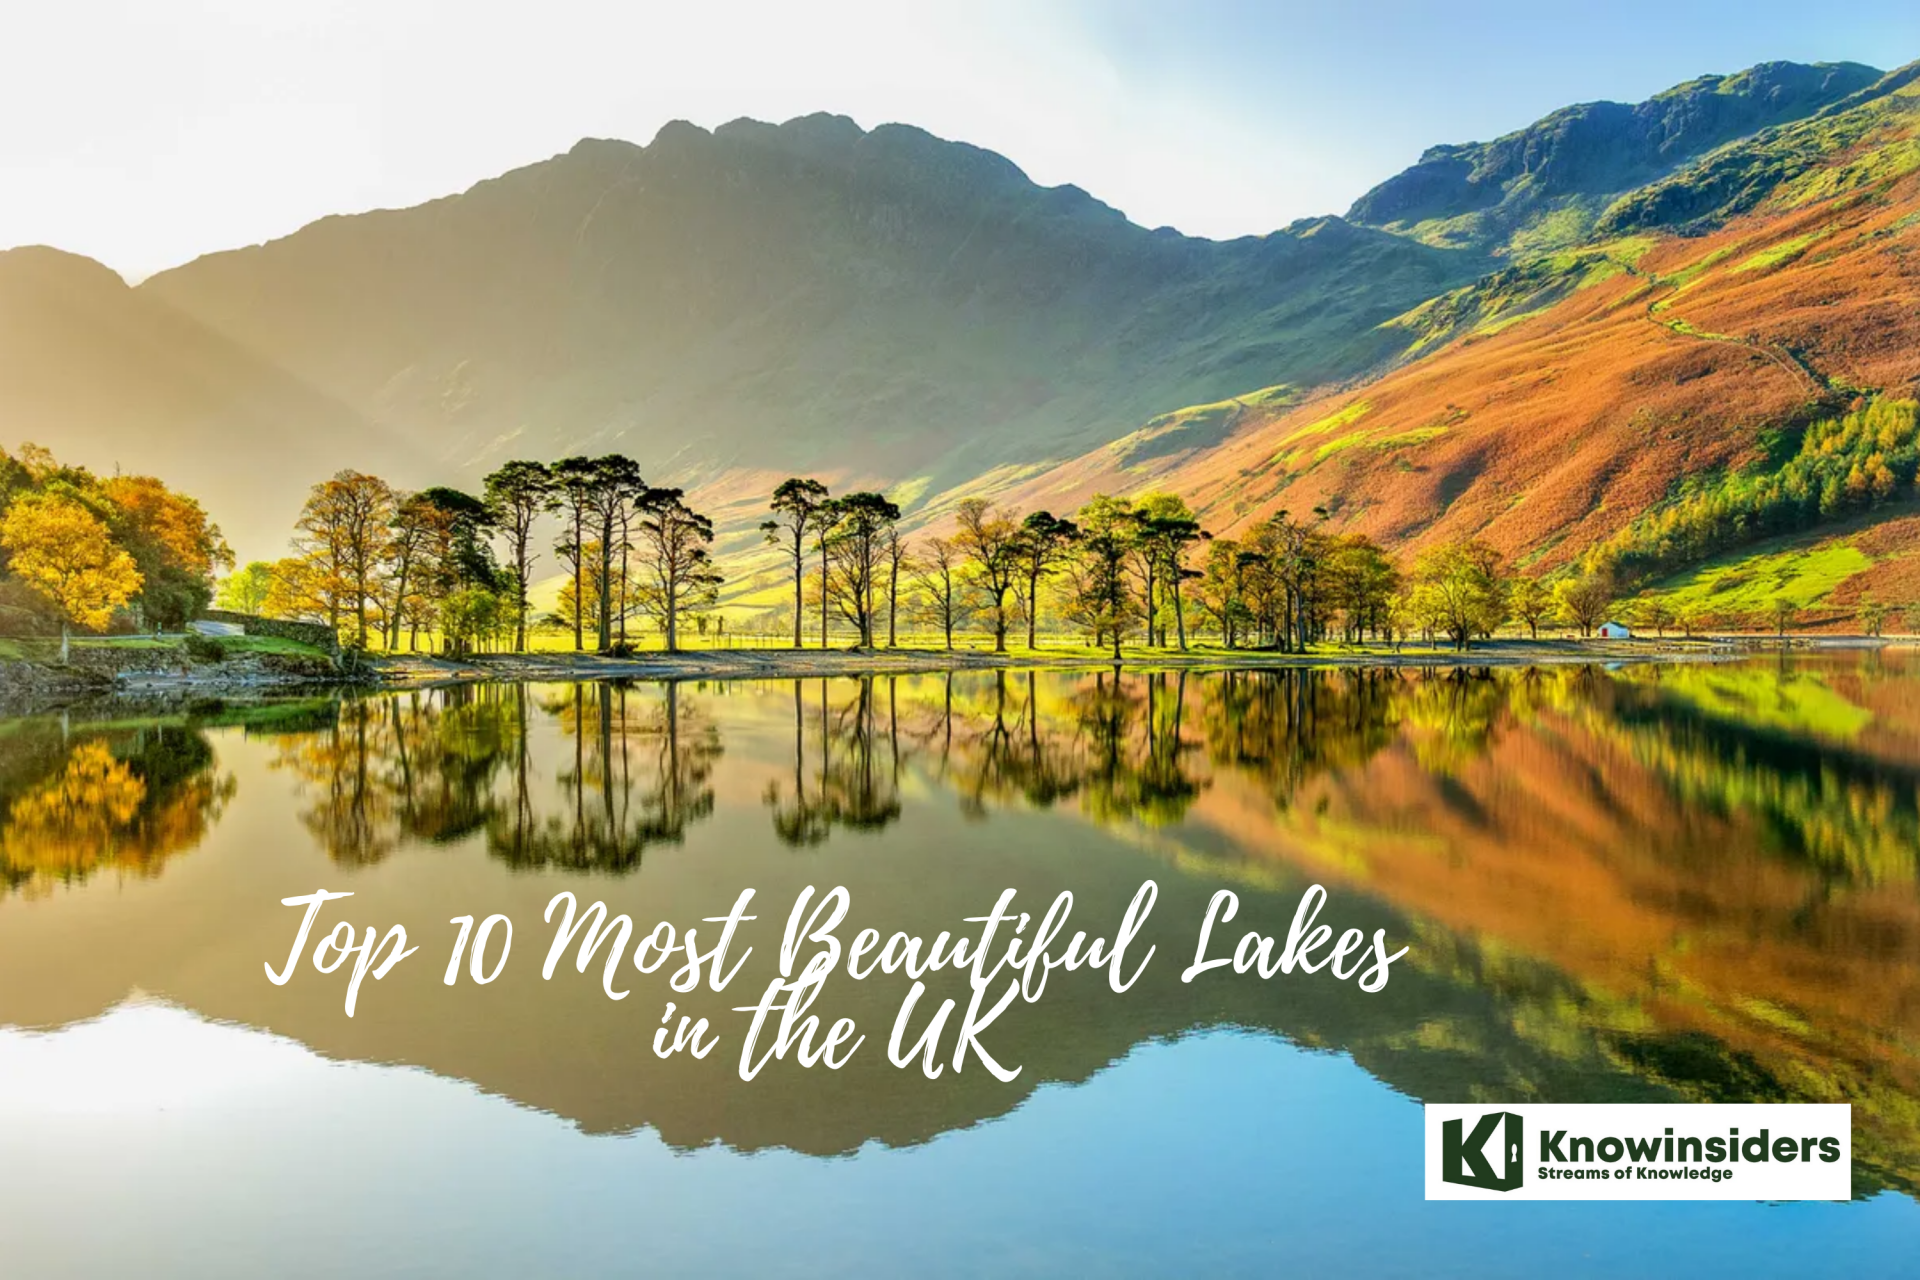 Top 10 Most Beautiful Lakes in the UK